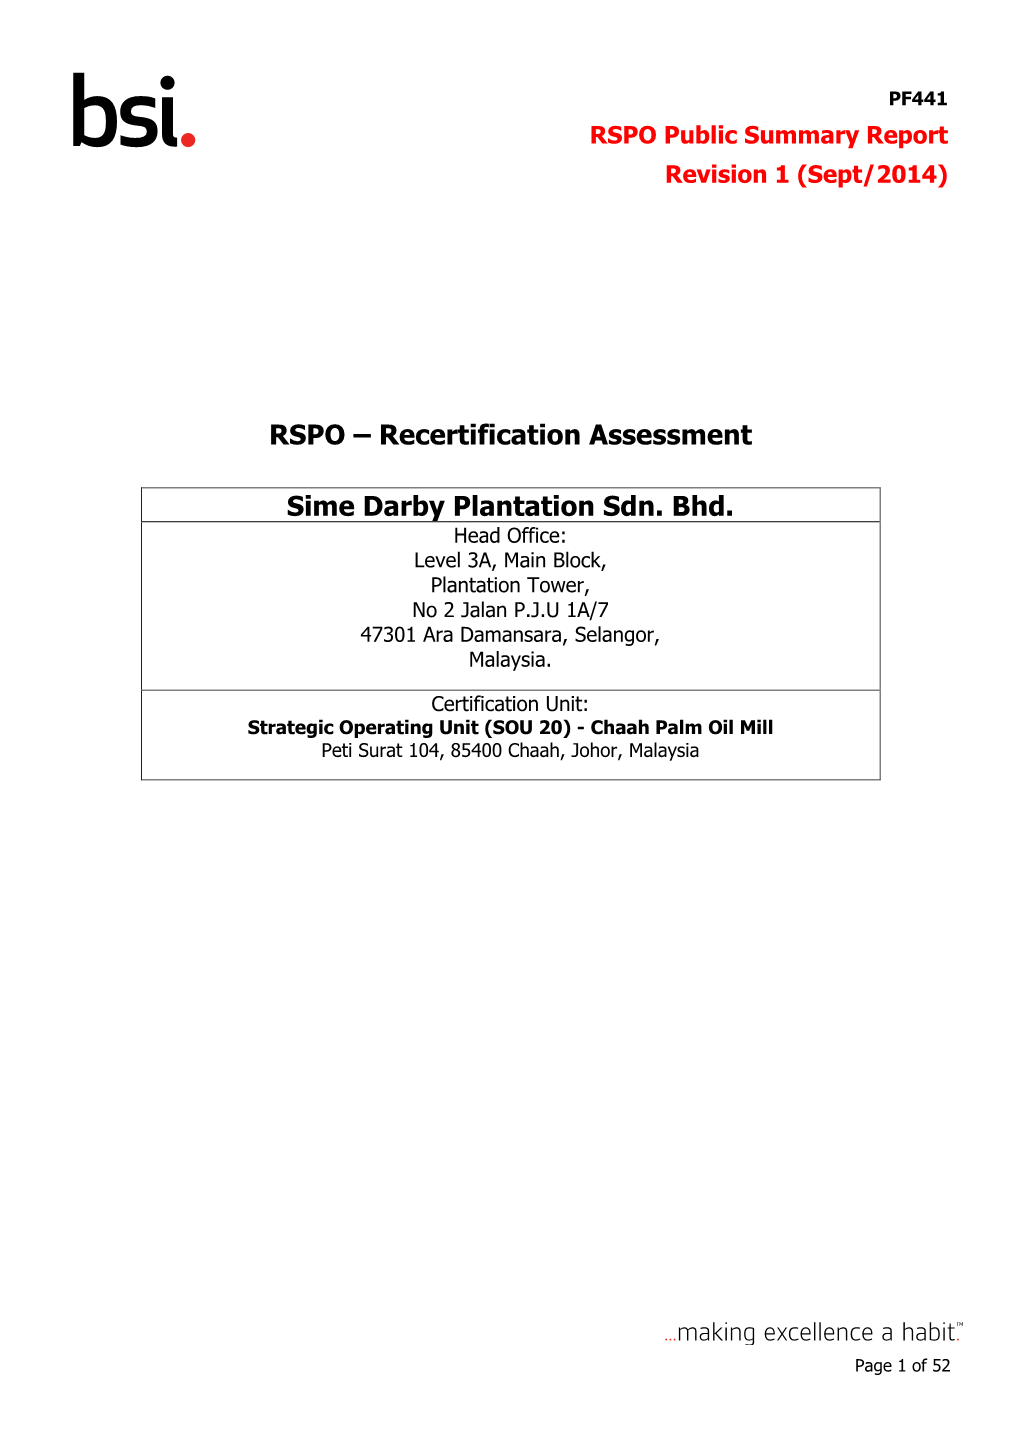 Recertification Assessment Sime Darby Plantation Sdn. Bhd